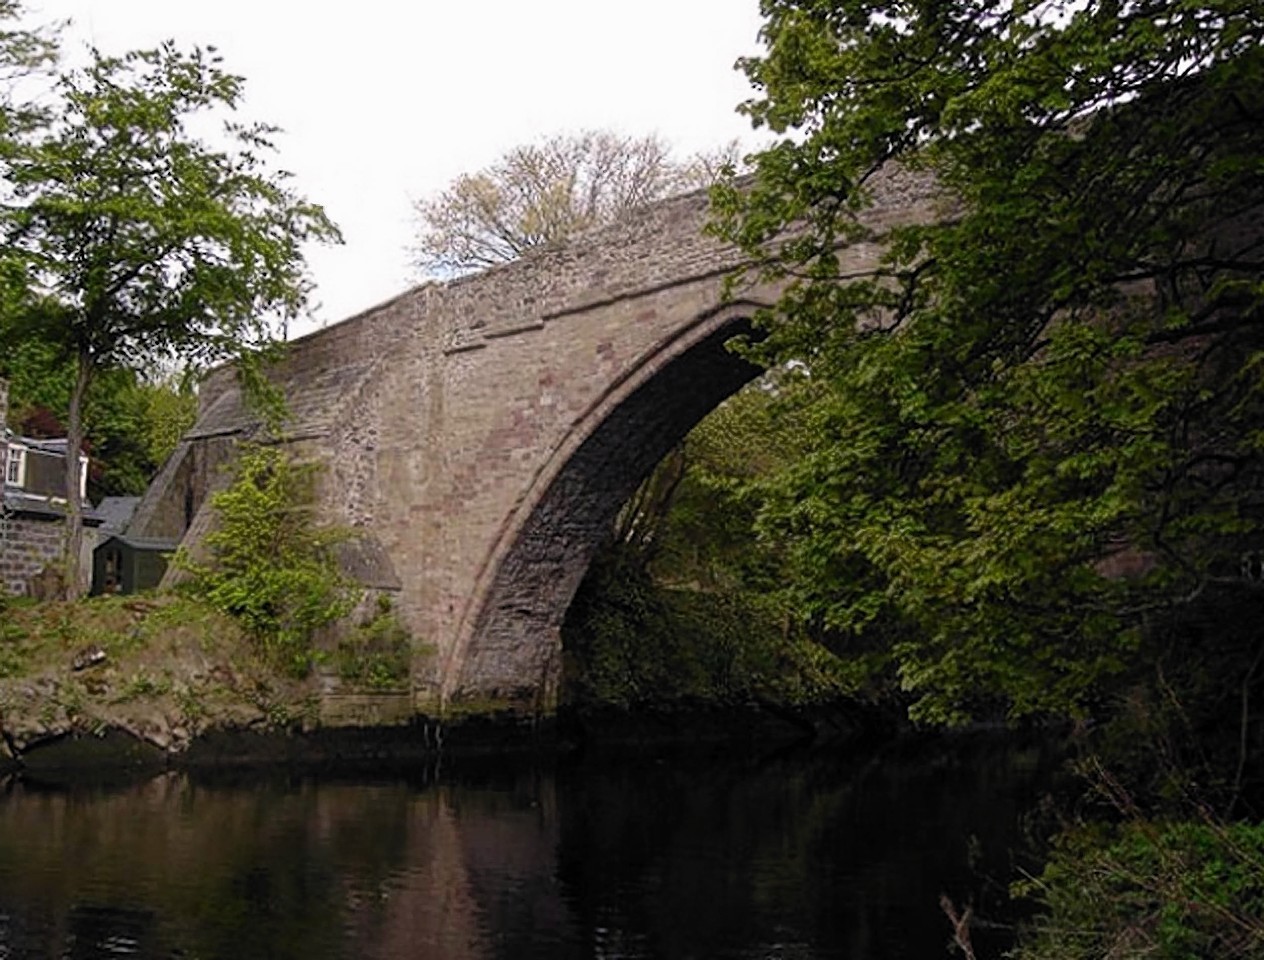 Balgownie Bridge is named as one of the locations